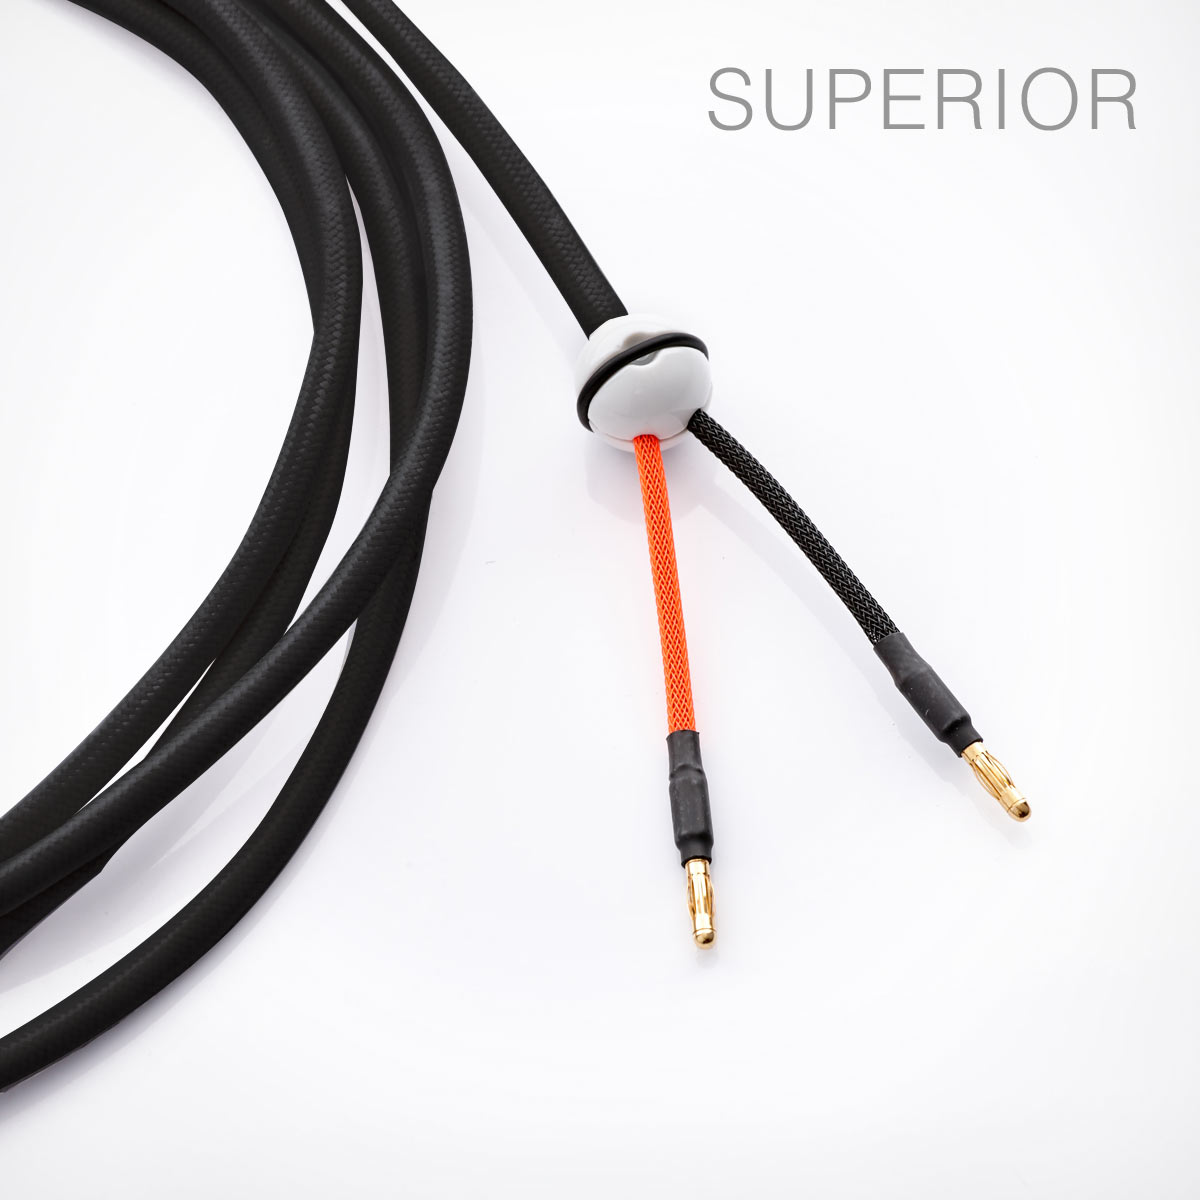 Loudspeaker cable, handmade, textile cabel with porcelain ball cable splitter and banans, black.